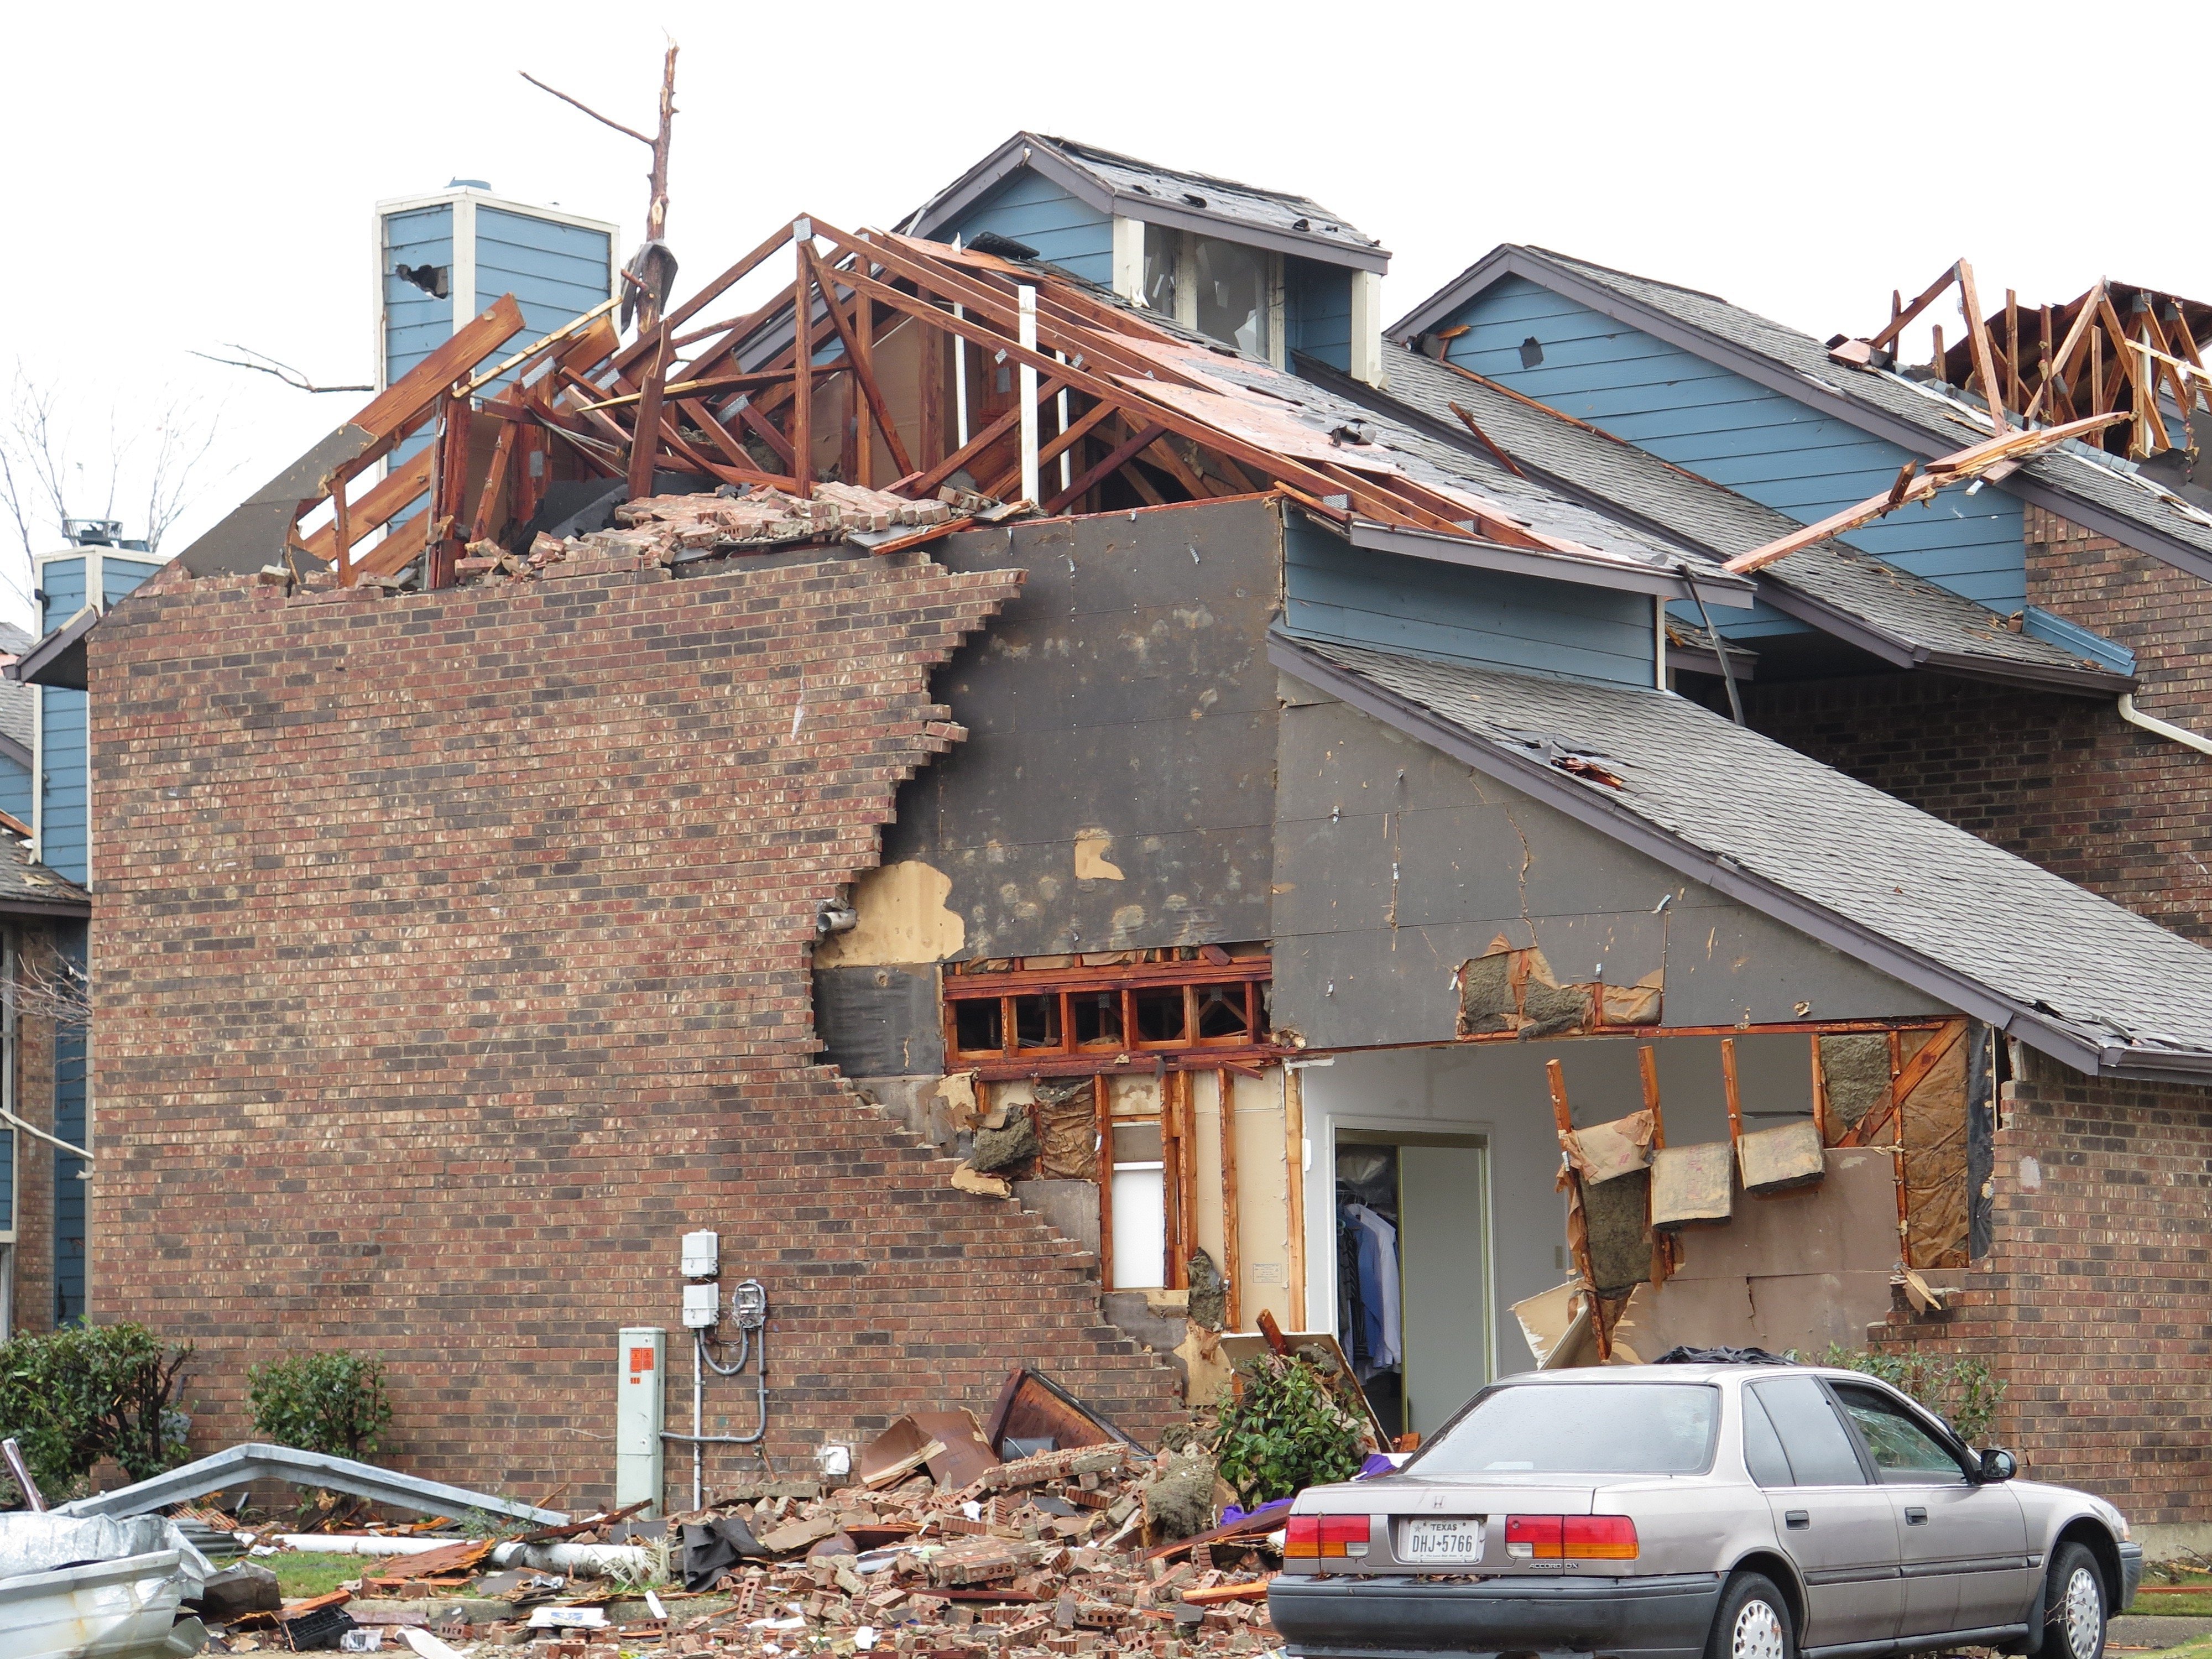 Photos showing damage to the Landmark at Lake Village West Apartments in Garland, Texas